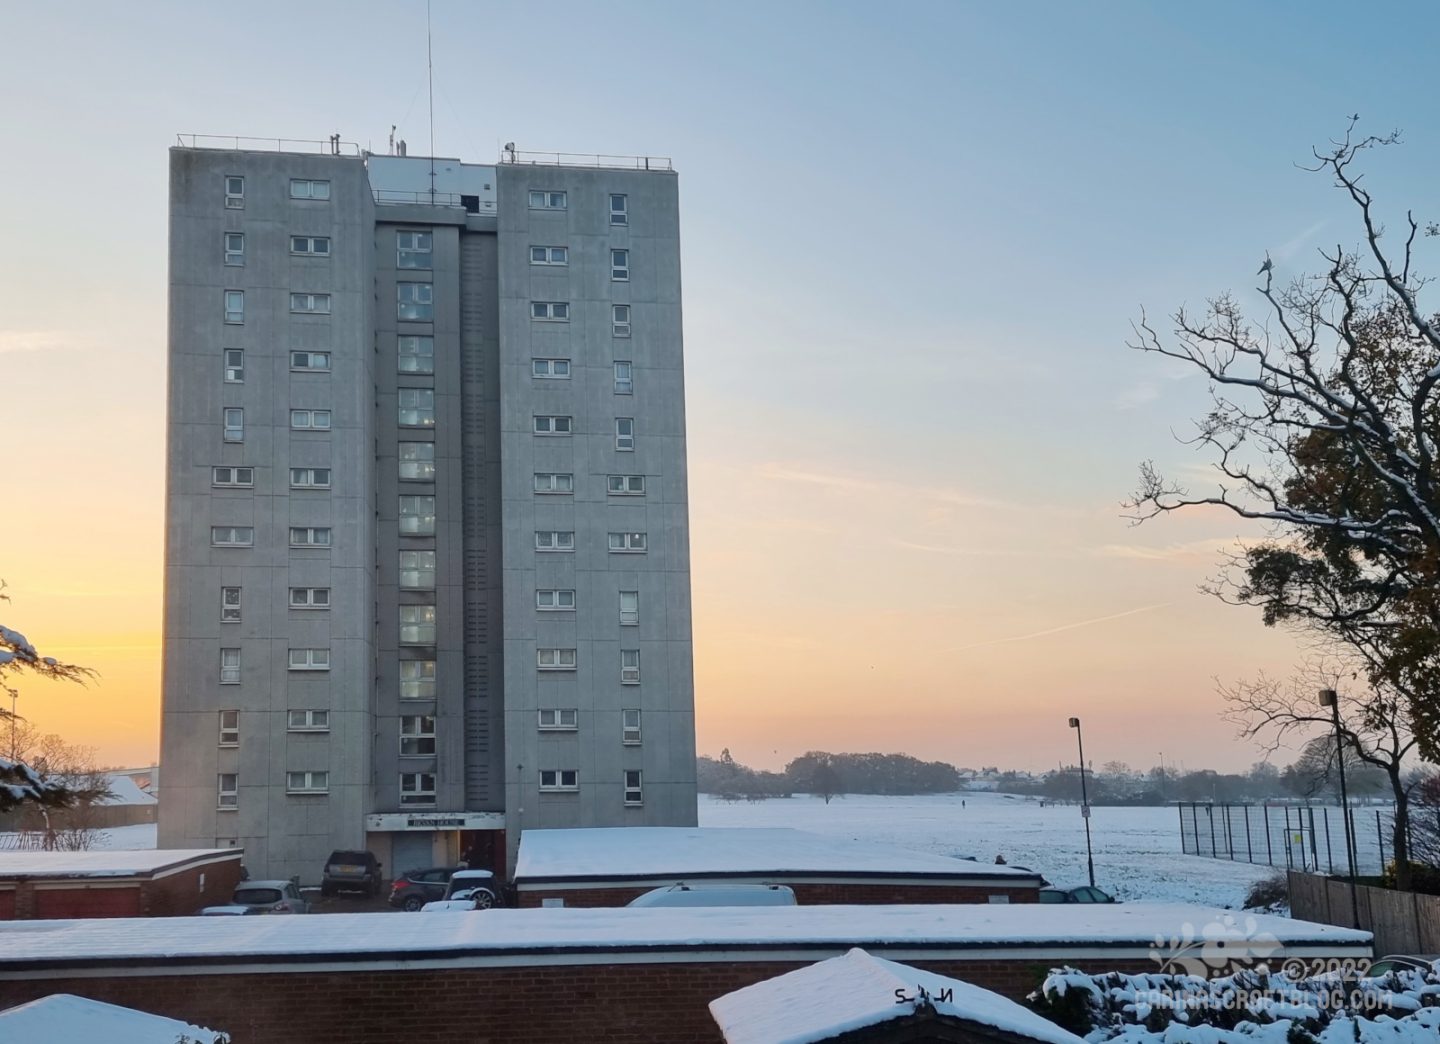 A block of flats stands in front of a snow covered field. In front of  the flats are rows of garages with snow covered roofs. In the back ground the sky is an orange ombre colour from the rising sun.